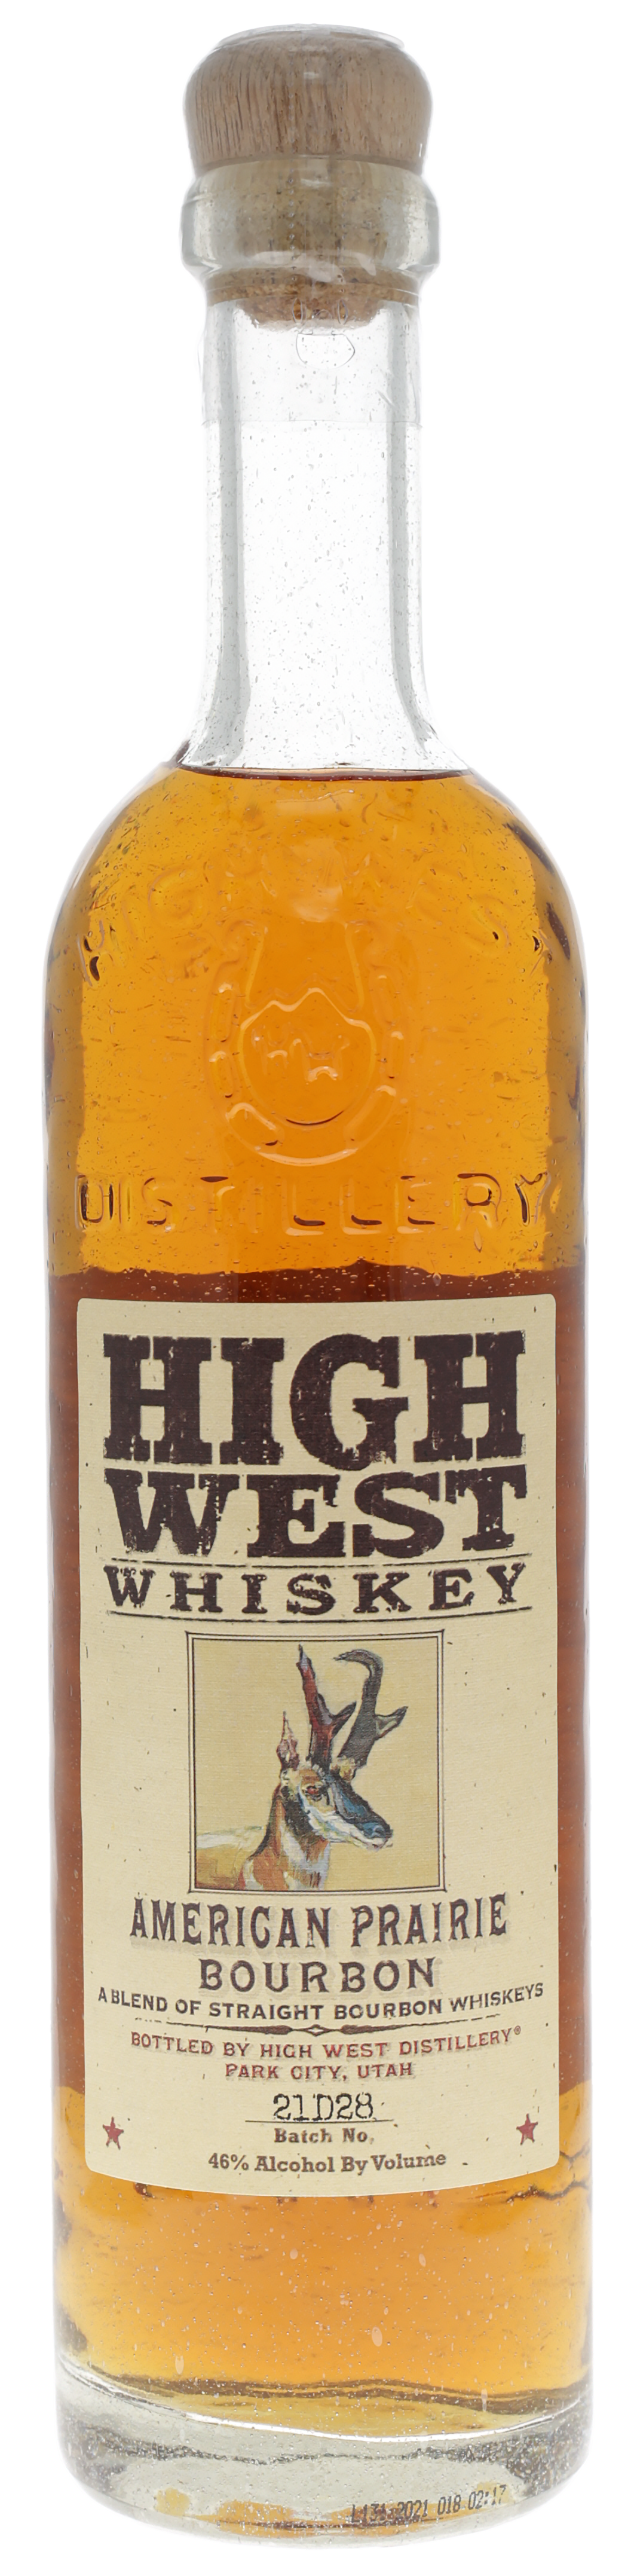 High West Whiskey  High West Whiskey